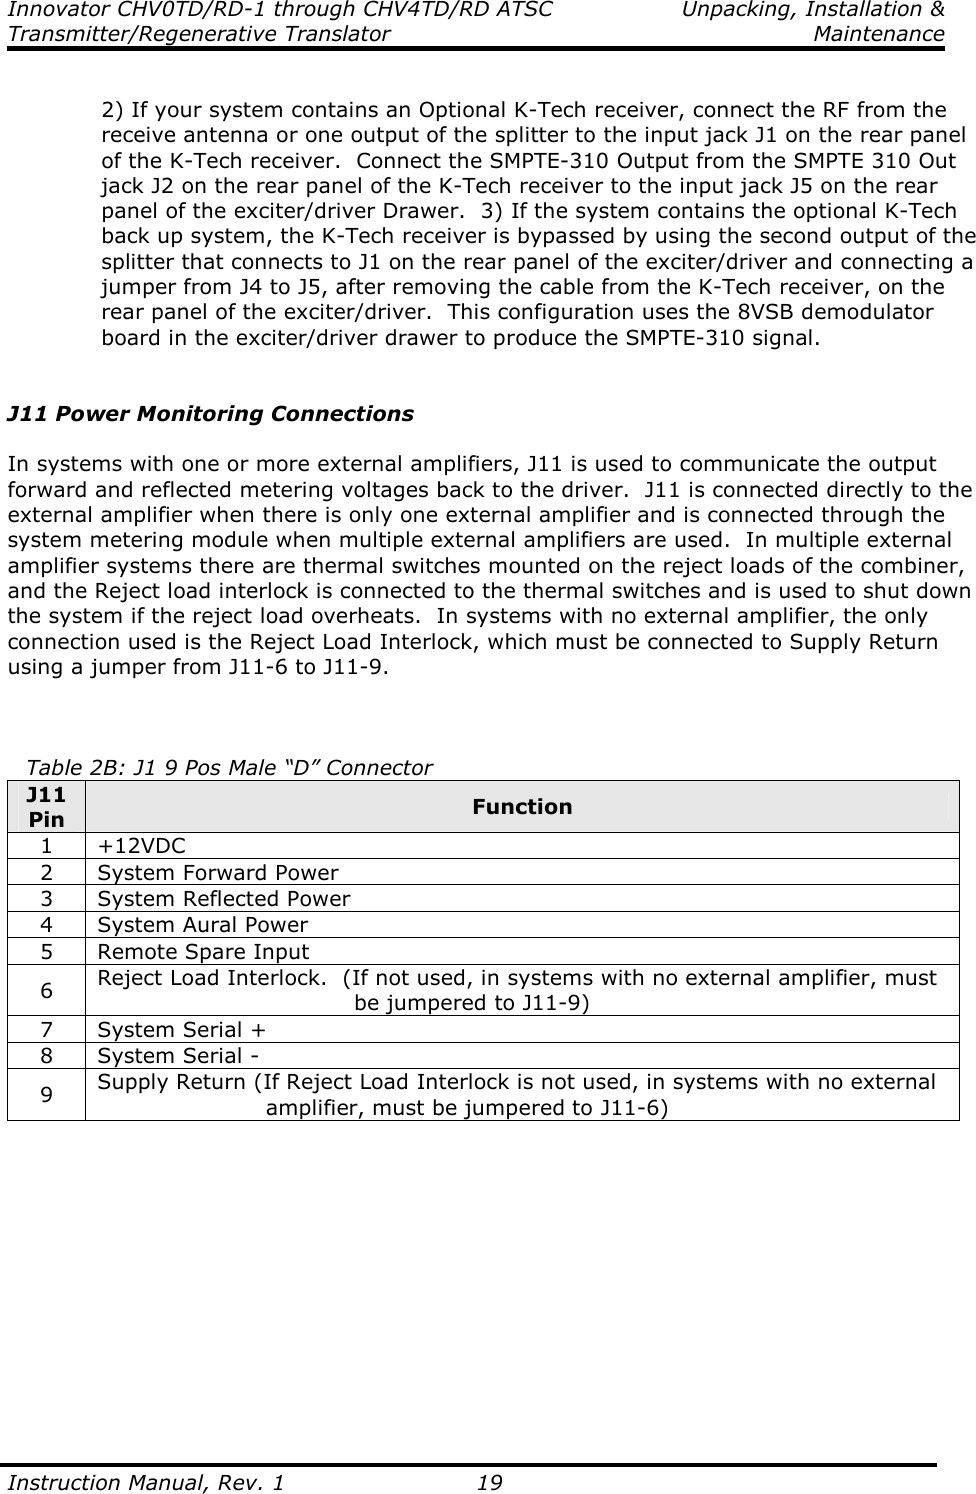 Innovator CHV0TD/RD-1 through CHV4TD/RD ATSC  Unpacking, Installation &amp; Transmitter/Regenerative Translator    Maintenance  Instruction Manual, Rev. 1    19  2) If your system contains an Optional K-Tech receiver, connect the RF from the receive antenna or one output of the splitter to the input jack J1 on the rear panel of the K-Tech receiver.  Connect the SMPTE-310 Output from the SMPTE 310 Out jack J2 on the rear panel of the K-Tech receiver to the input jack J5 on the rear panel of the exciter/driver Drawer.  3) If the system contains the optional K-Tech back up system, the K-Tech receiver is bypassed by using the second output of the splitter that connects to J1 on the rear panel of the exciter/driver and connecting a jumper from J4 to J5, after removing the cable from the K-Tech receiver, on the rear panel of the exciter/driver.  This configuration uses the 8VSB demodulator board in the exciter/driver drawer to produce the SMPTE-310 signal.   J11 Power Monitoring Connections  In systems with one or more external amplifiers, J11 is used to communicate the output forward and reflected metering voltages back to the driver.  J11 is connected directly to the external amplifier when there is only one external amplifier and is connected through the system metering module when multiple external amplifiers are used.  In multiple external amplifier systems there are thermal switches mounted on the reject loads of the combiner, and the Reject load interlock is connected to the thermal switches and is used to shut down the system if the reject load overheats.  In systems with no external amplifier, the only connection used is the Reject Load Interlock, which must be connected to Supply Return using a jumper from J11-6 to J11-9.     Table 2B: J1 9 Pos Male “D” Connector J11 Pin  Function 1  +12VDC 2  System Forward Power 3  System Reflected Power 4  System Aural Power 5  Remote Spare Input 6  Reject Load Interlock.  (If not used, in systems with no external amplifier, must                                    be jumpered to J11-9) 7  System Serial + 8  System Serial - 9  Supply Return (If Reject Load Interlock is not used, in systems with no external                        amplifier, must be jumpered to J11-6)   